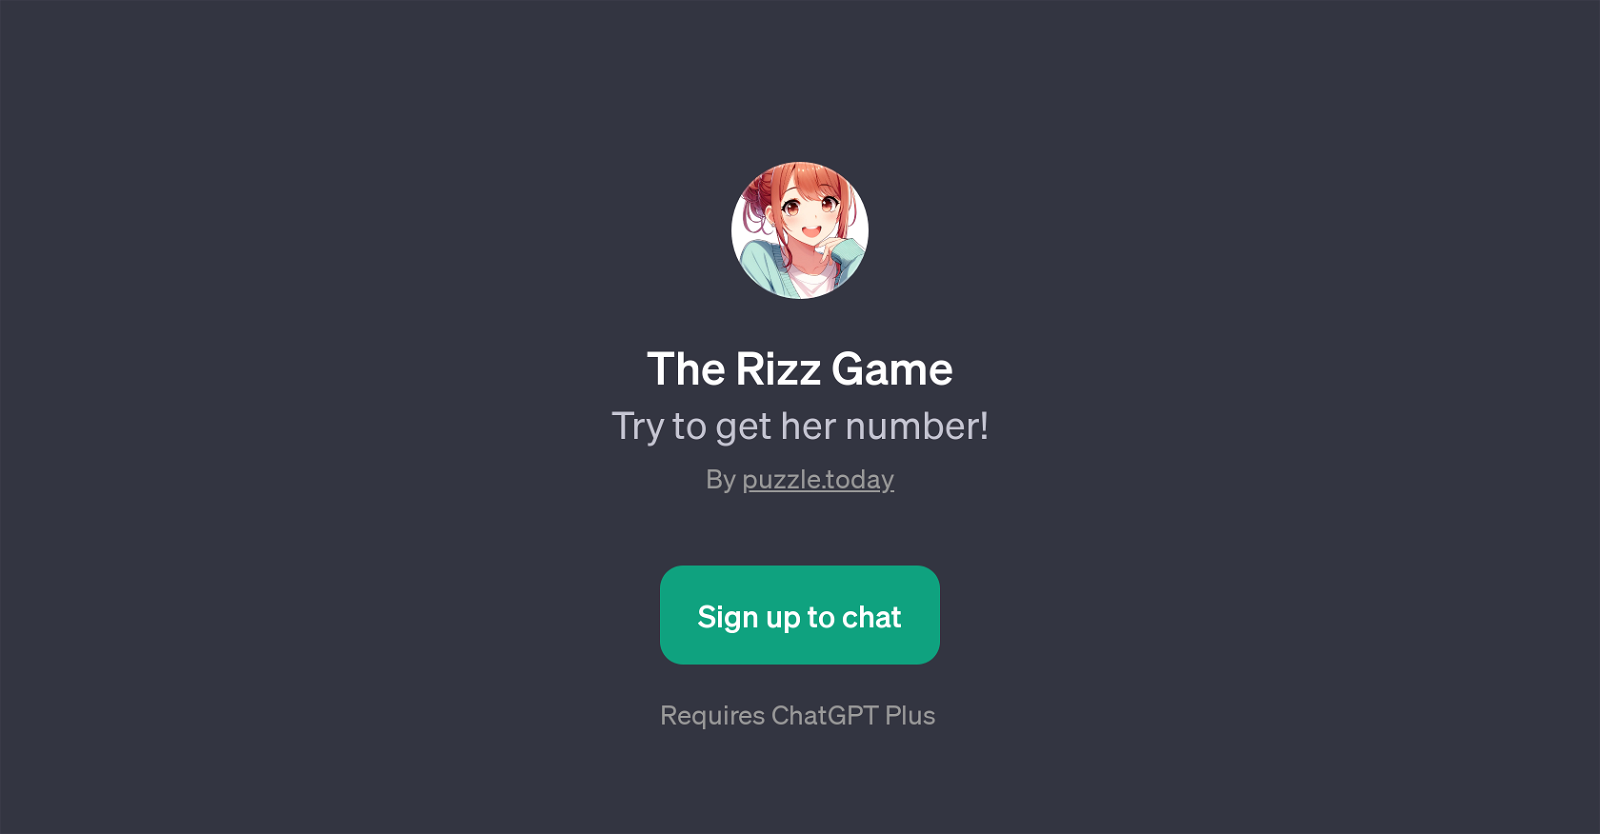 The Rizz Game website